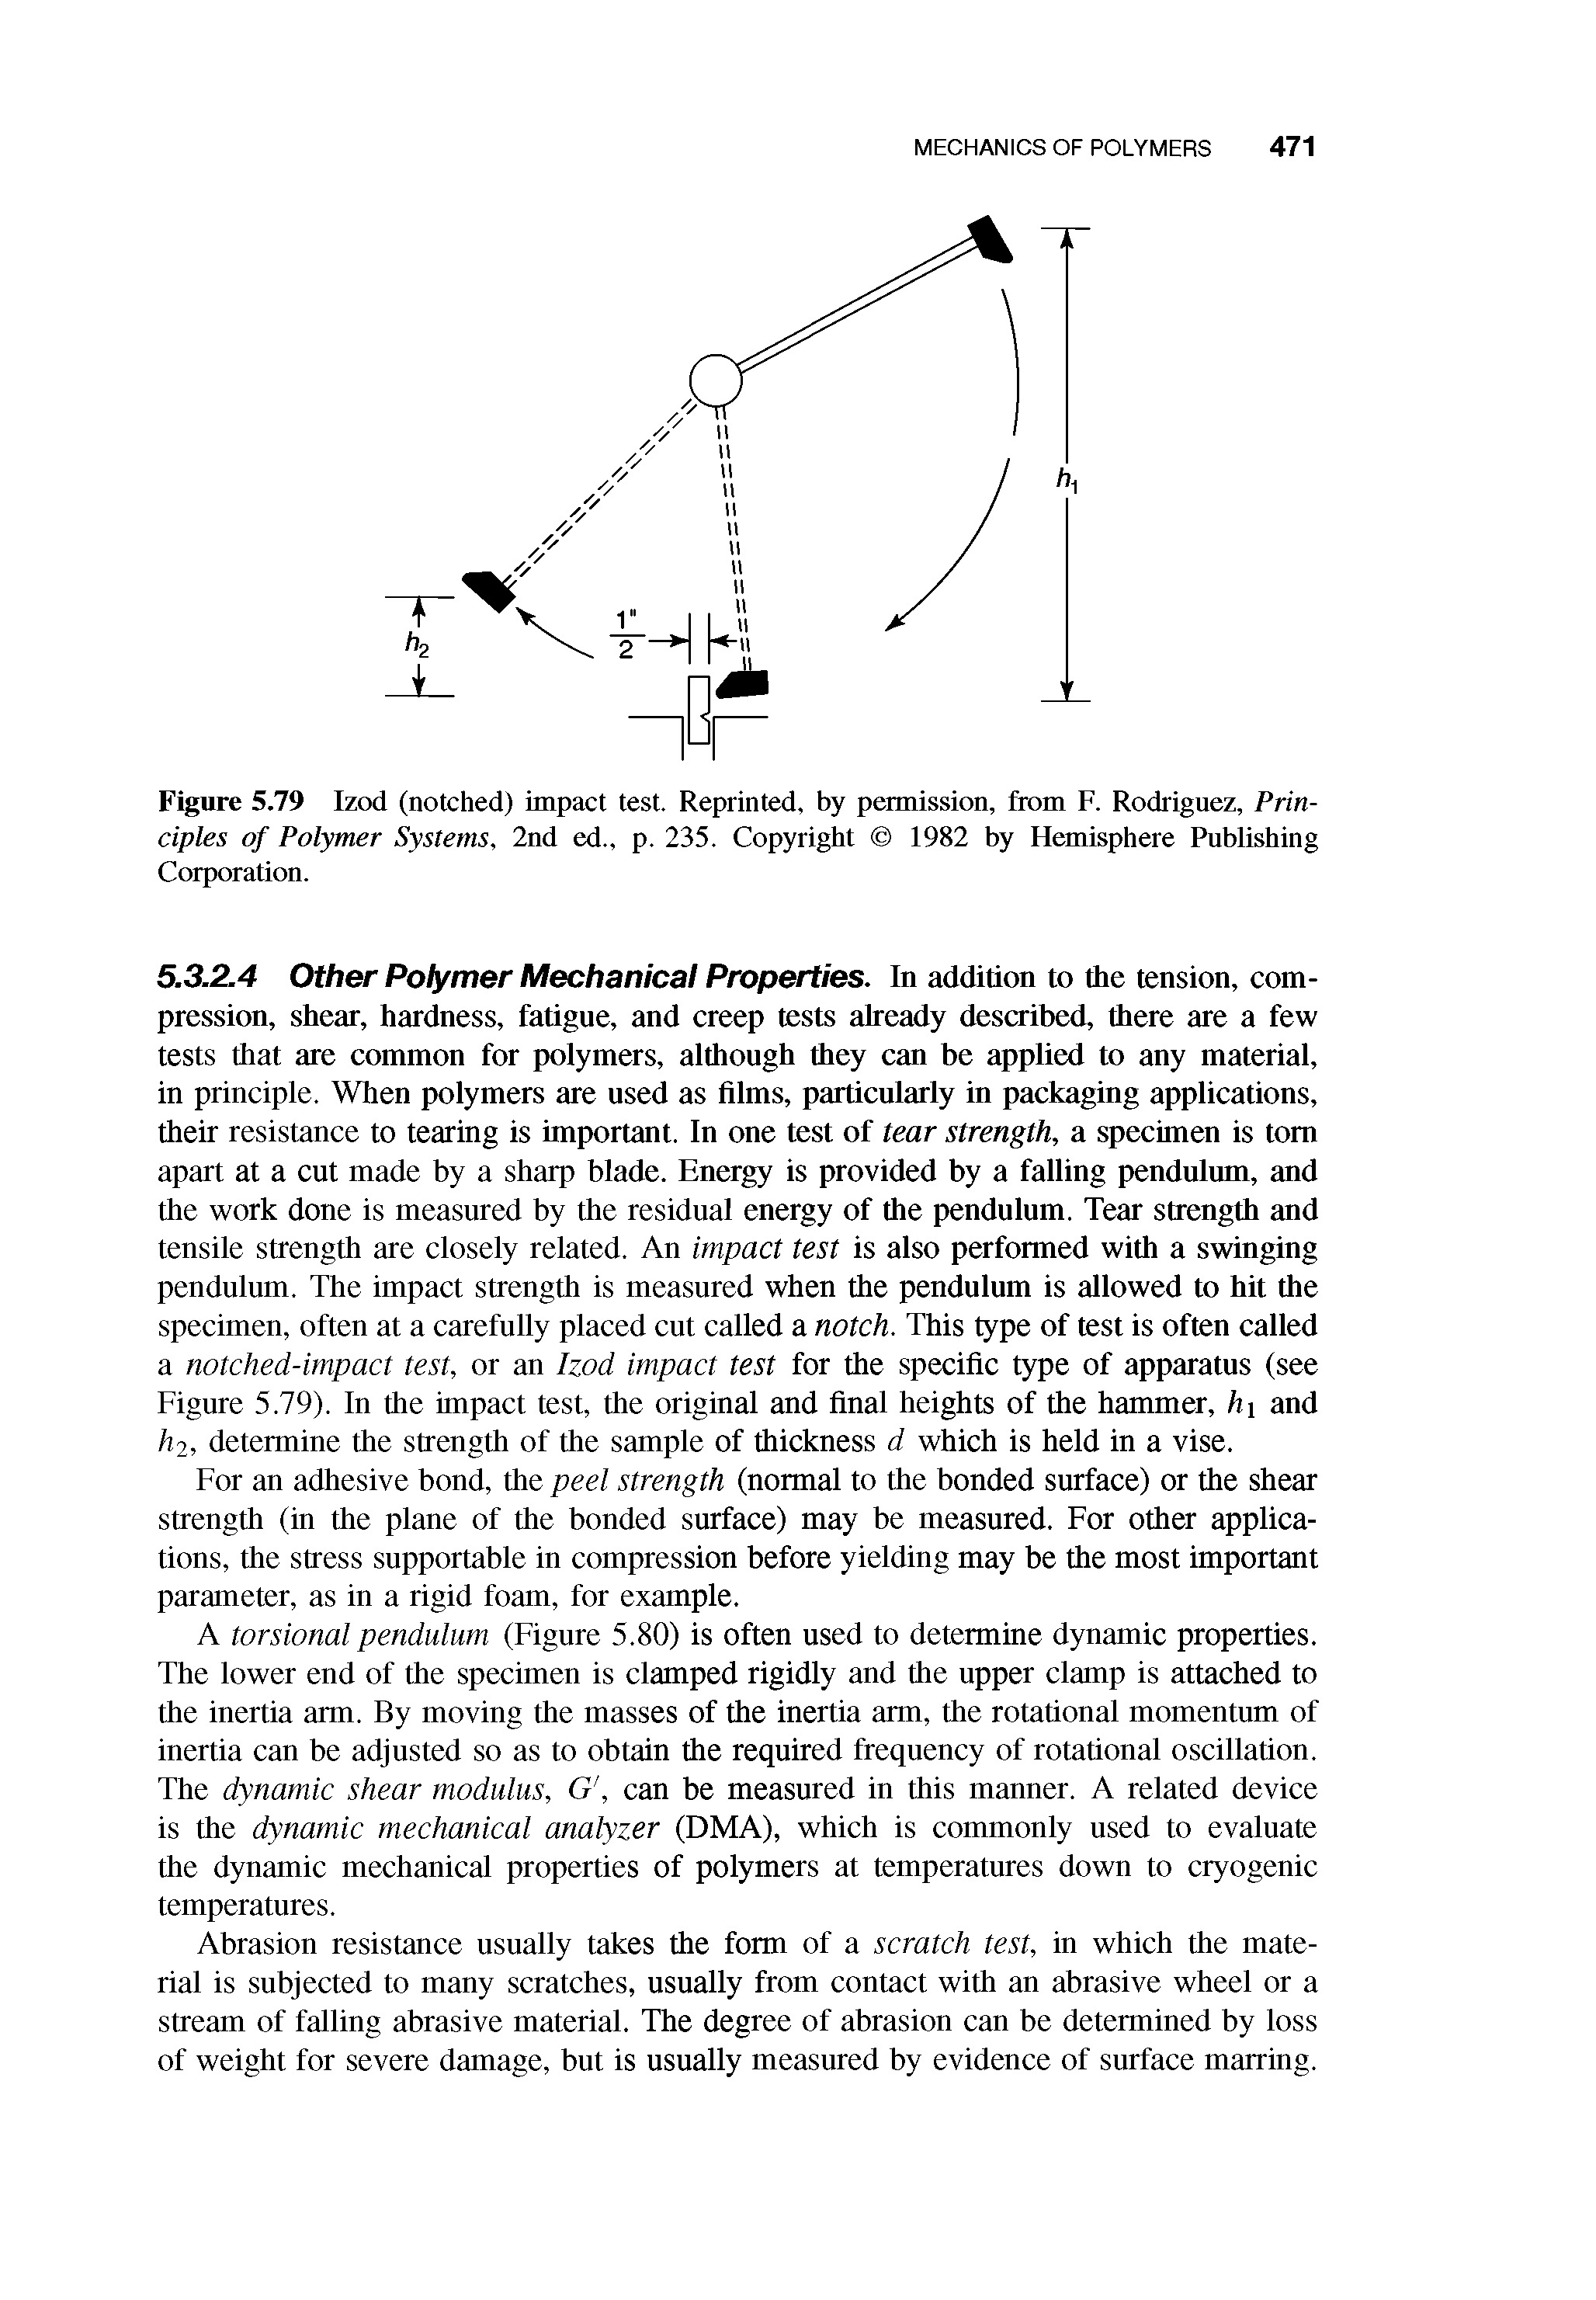 Figure 5.79 Izod (notched) impact test. Reprinted, by permission, from F. Rodrignez, Principles of Polymer Systems, 2nd ed., p. 235. Copyright 1982 by Hemisphere Pnblishing Corporation.